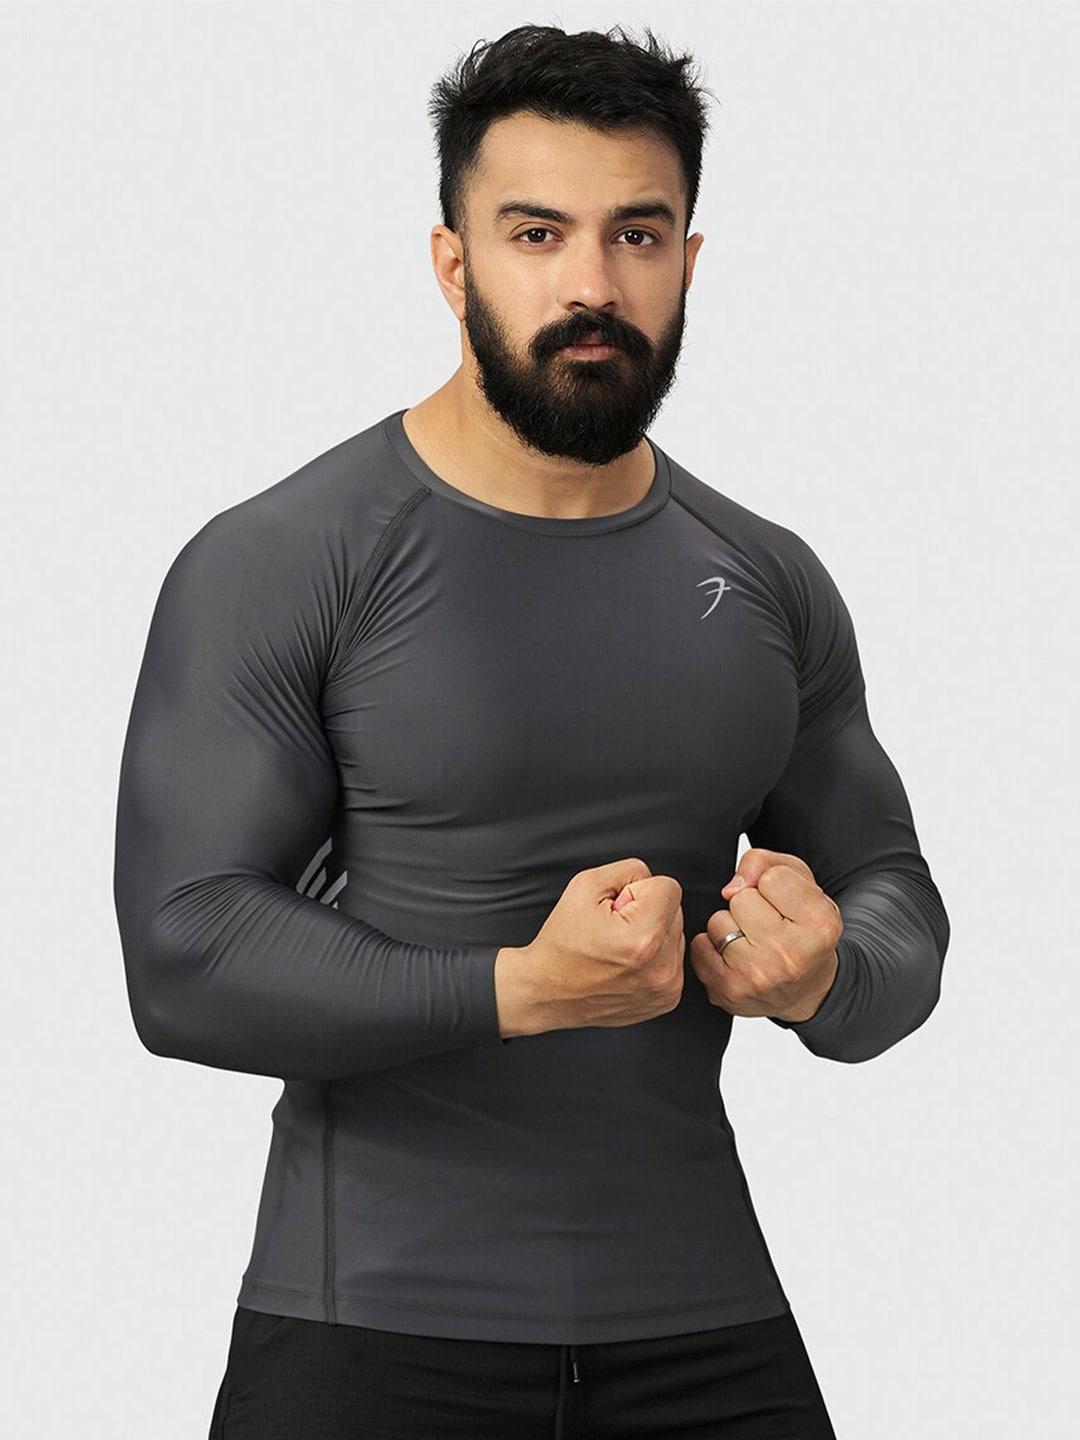 FUAARK Round Neck Anti Odour Compression Fit T-shirt